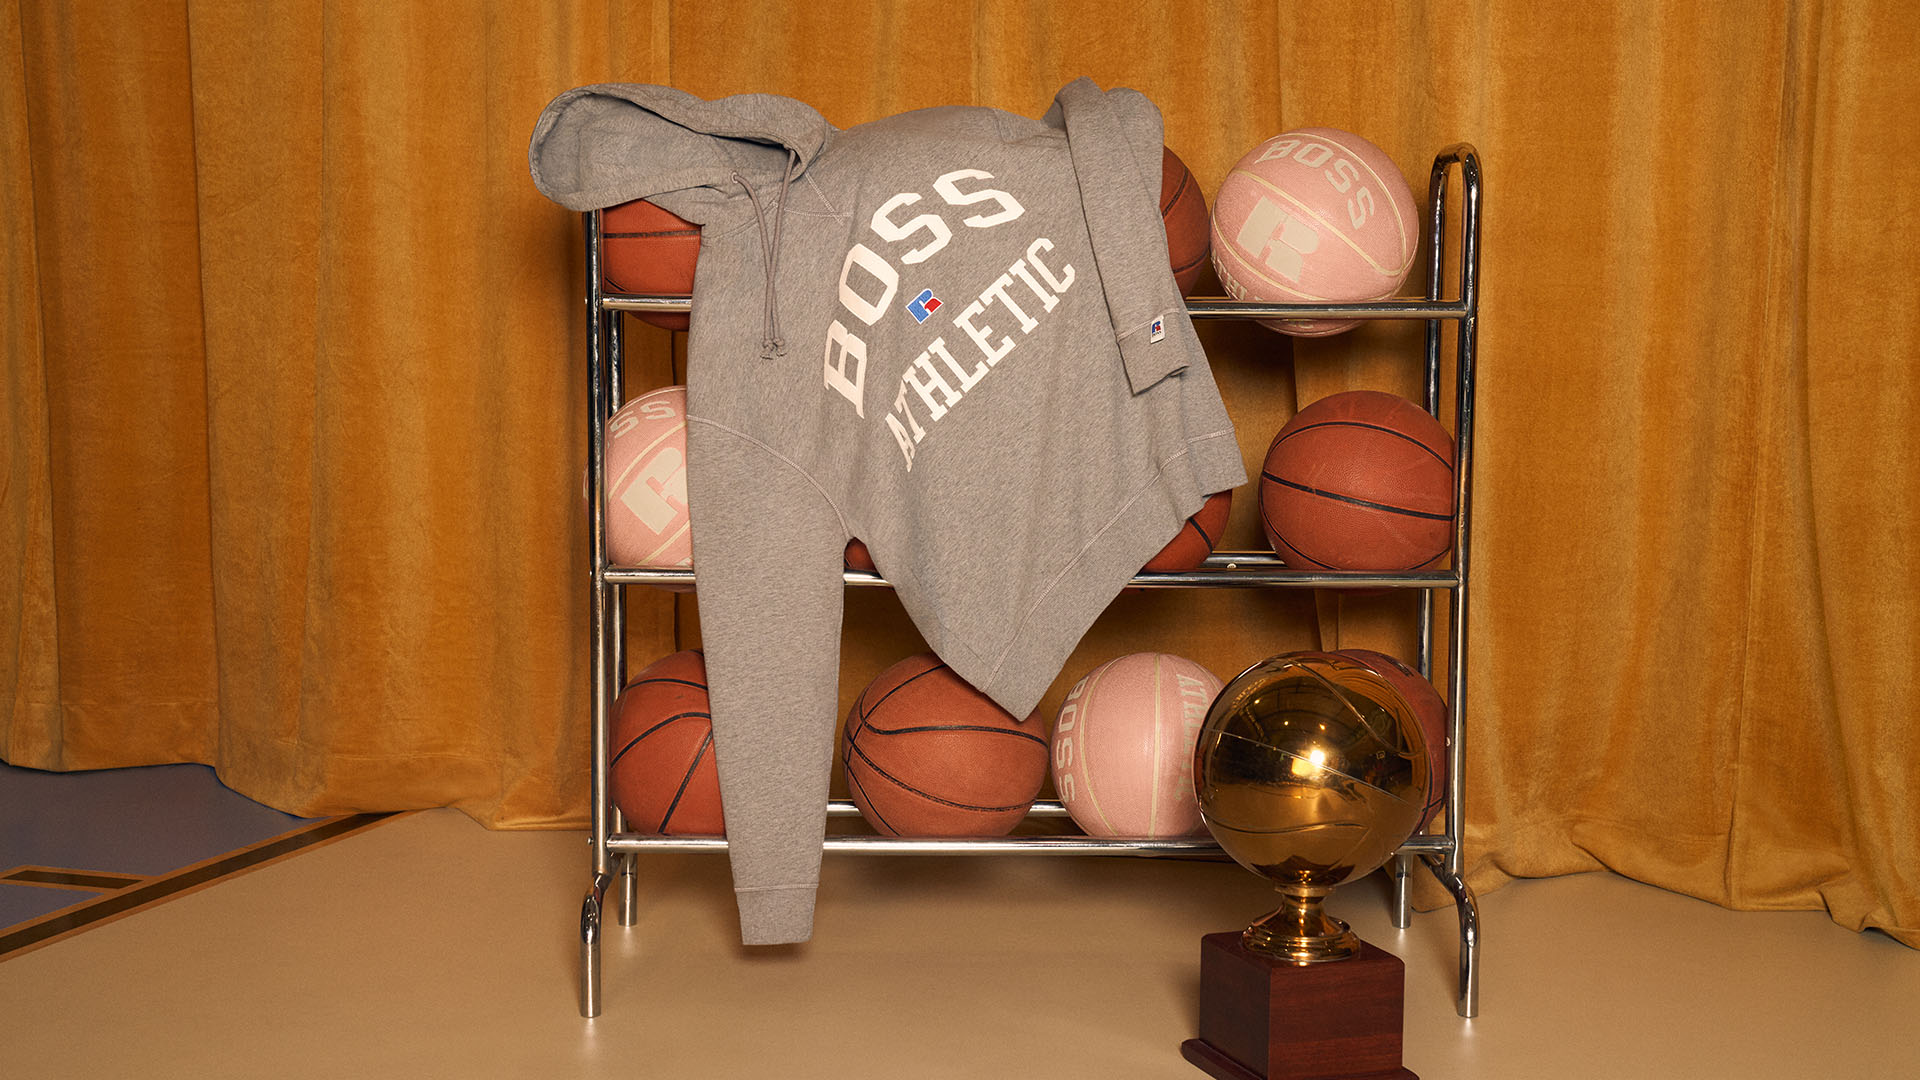 BOSS x Russell Athletic   An ode to off court dressing